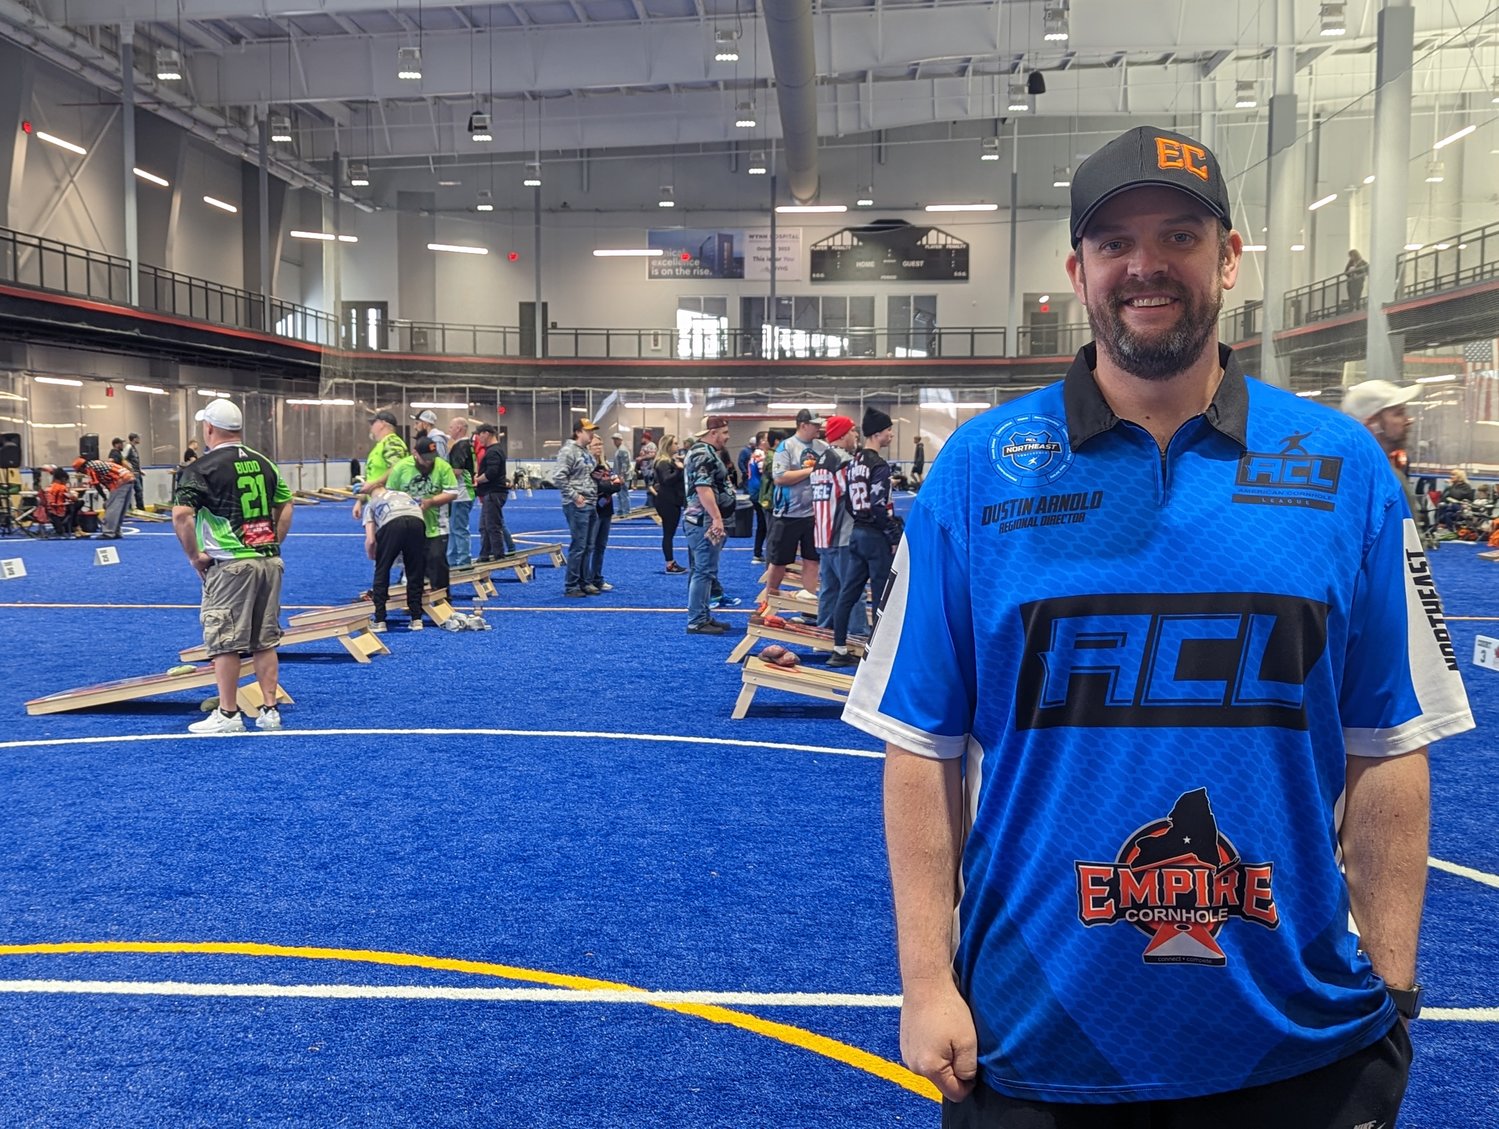 Dustin Arnold is the New York State director for the American Cornhole League, and the regional director for the Utica region. He hosts a monthly tournament for players of all ages at the Nexus Center in Utica. Arnold got into the cornhole business in 2015 and now runs his own event and equipment company, Empire Cornhole.